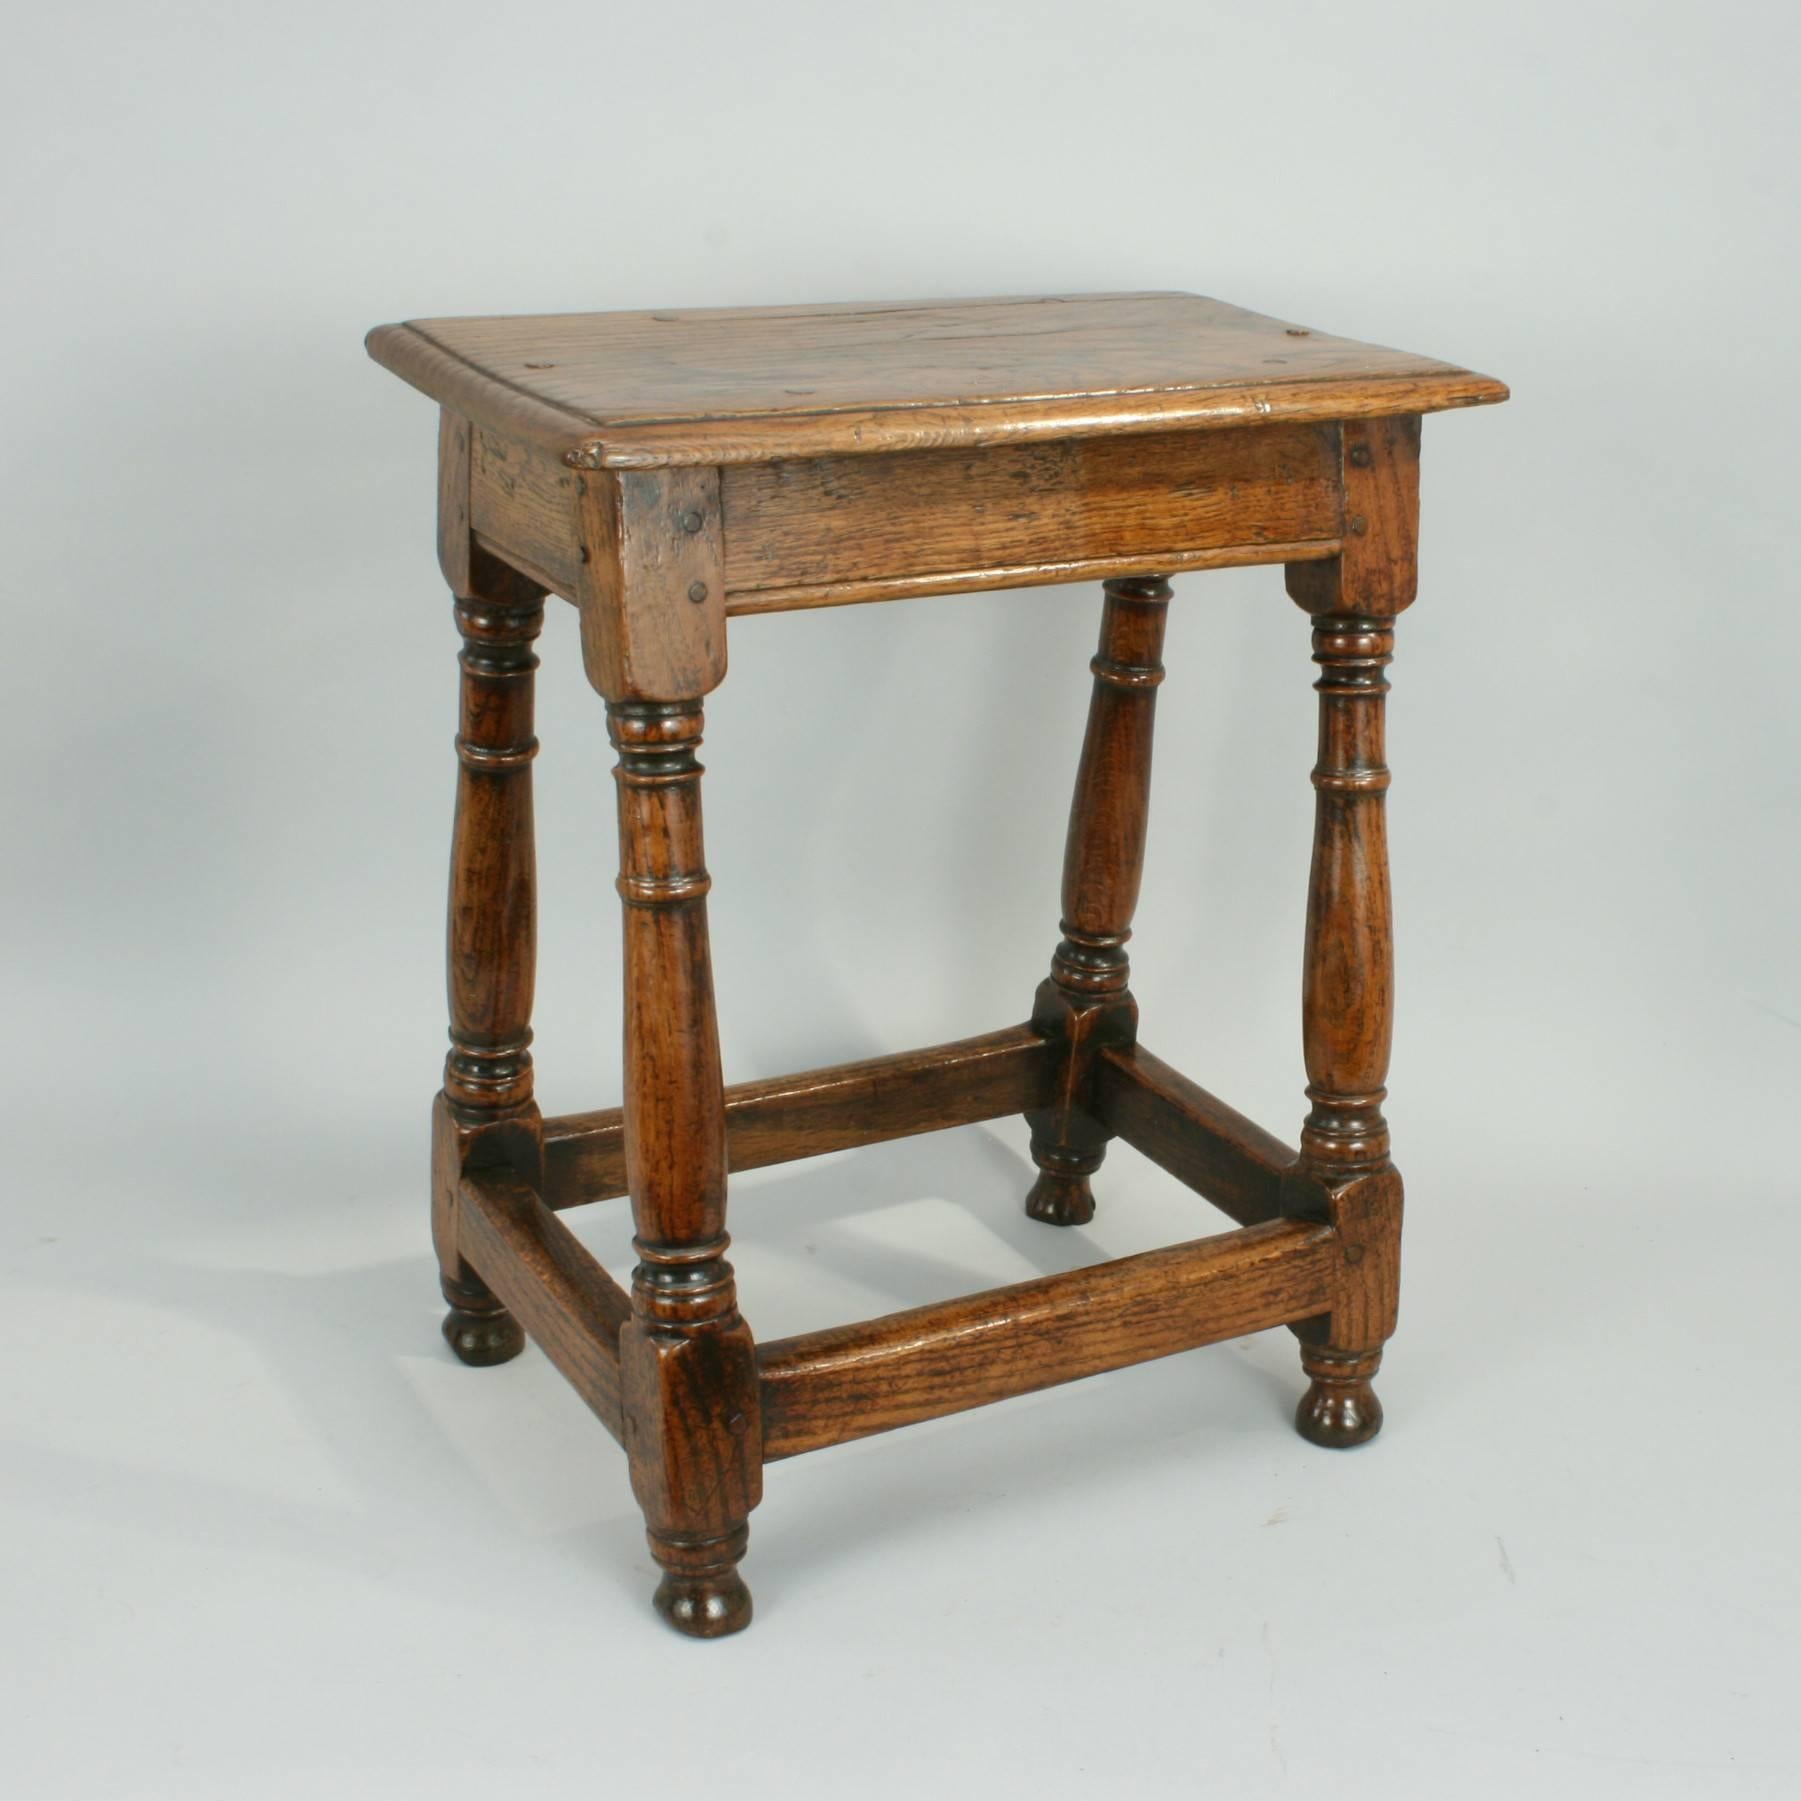 British Antique Early Oak Joint Stool